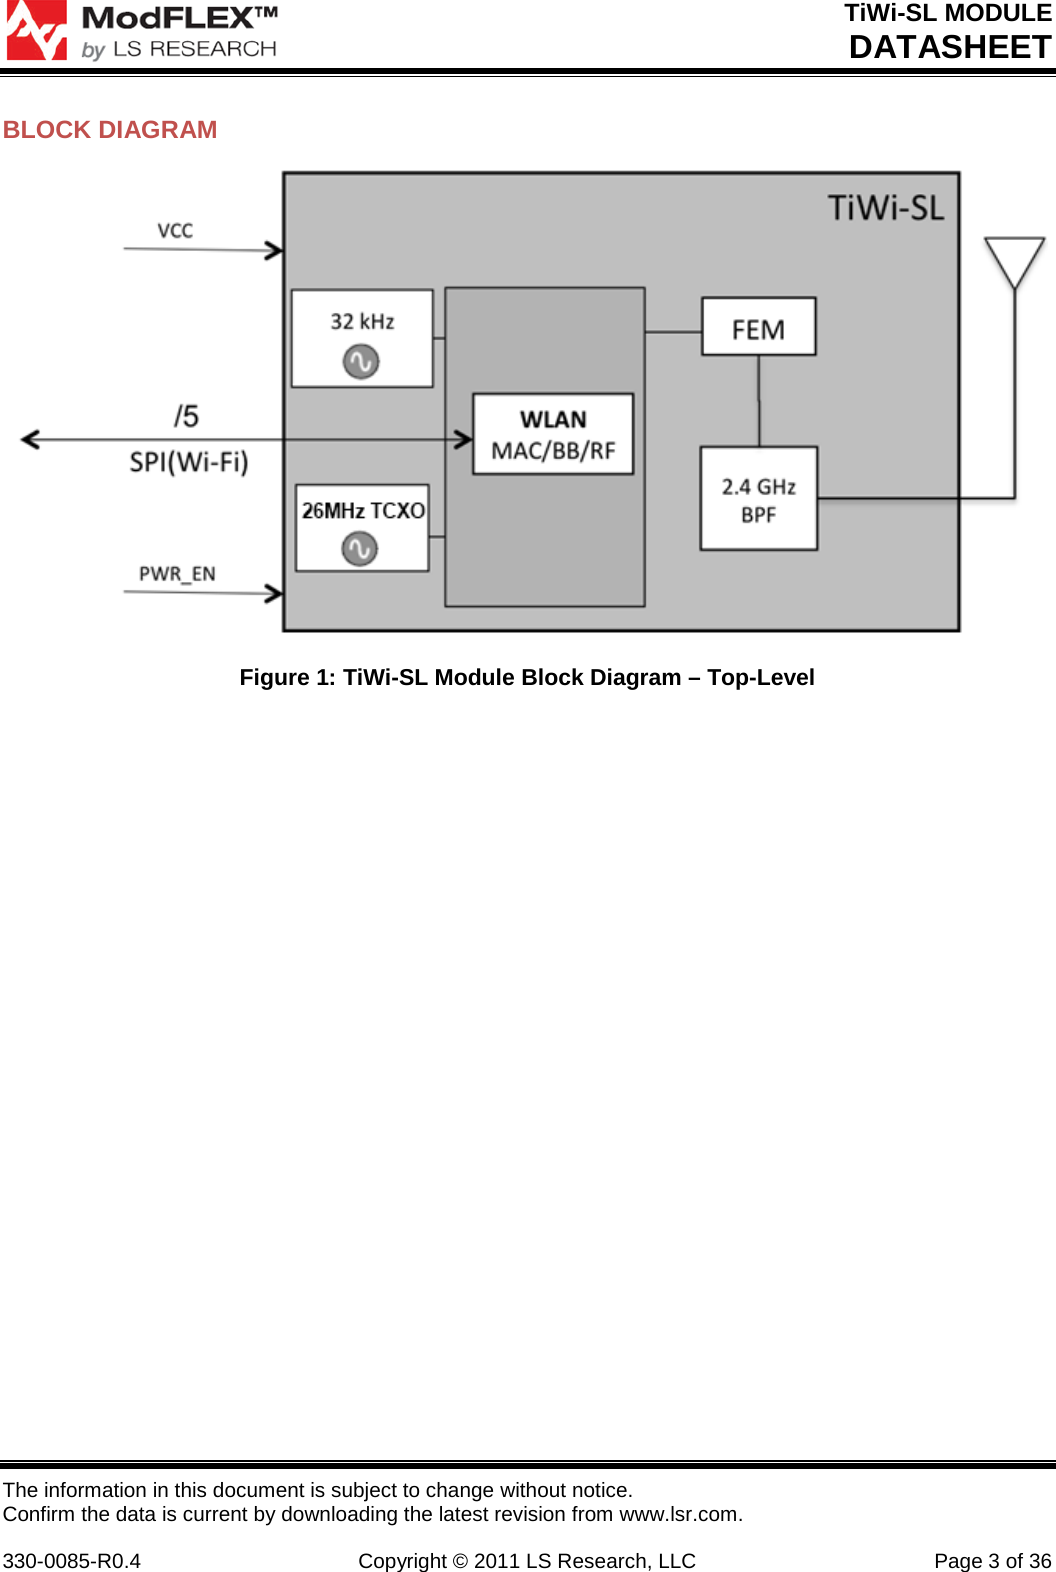 TiWi-SL MODULE DATASHEET The information in this document is subject to change without notice. Confirm the data is current by downloading the latest revision from www.lsr.com.  330-0085-R0.4 Copyright © 2011 LS Research, LLC Page 3 of 36 BLOCK DIAGRAM  Figure 1: TiWi-SL Module Block Diagram – Top-Level  